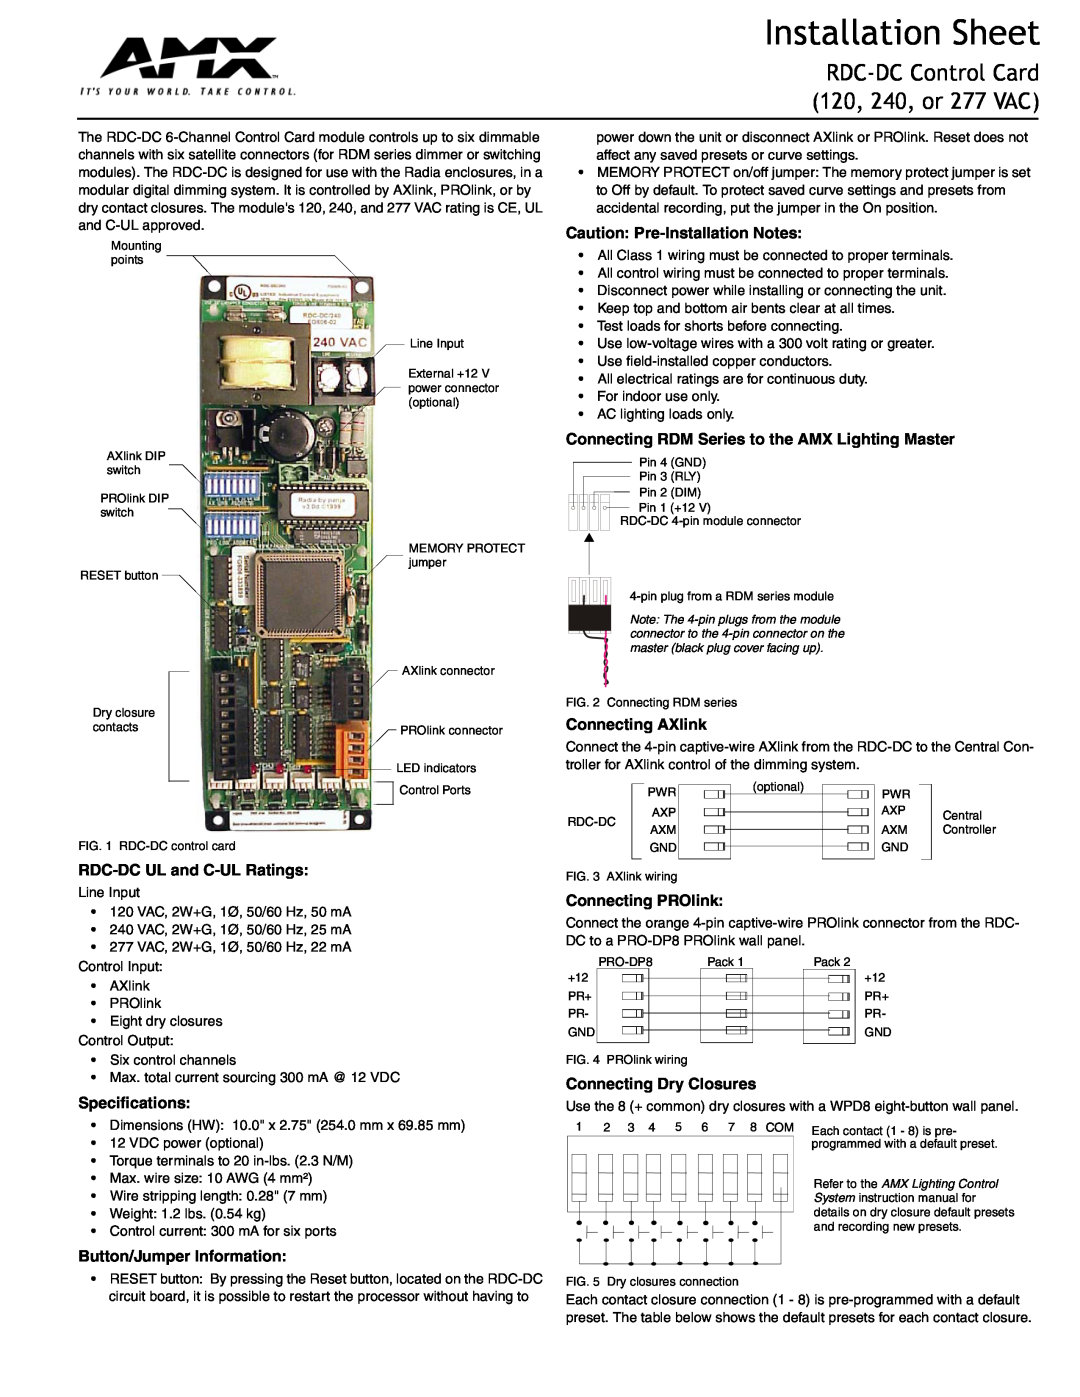 AMX specifications RDC-DC UL and C-UL Ratings, Specifications, Button/Jumper Information, Connecting AXlink 